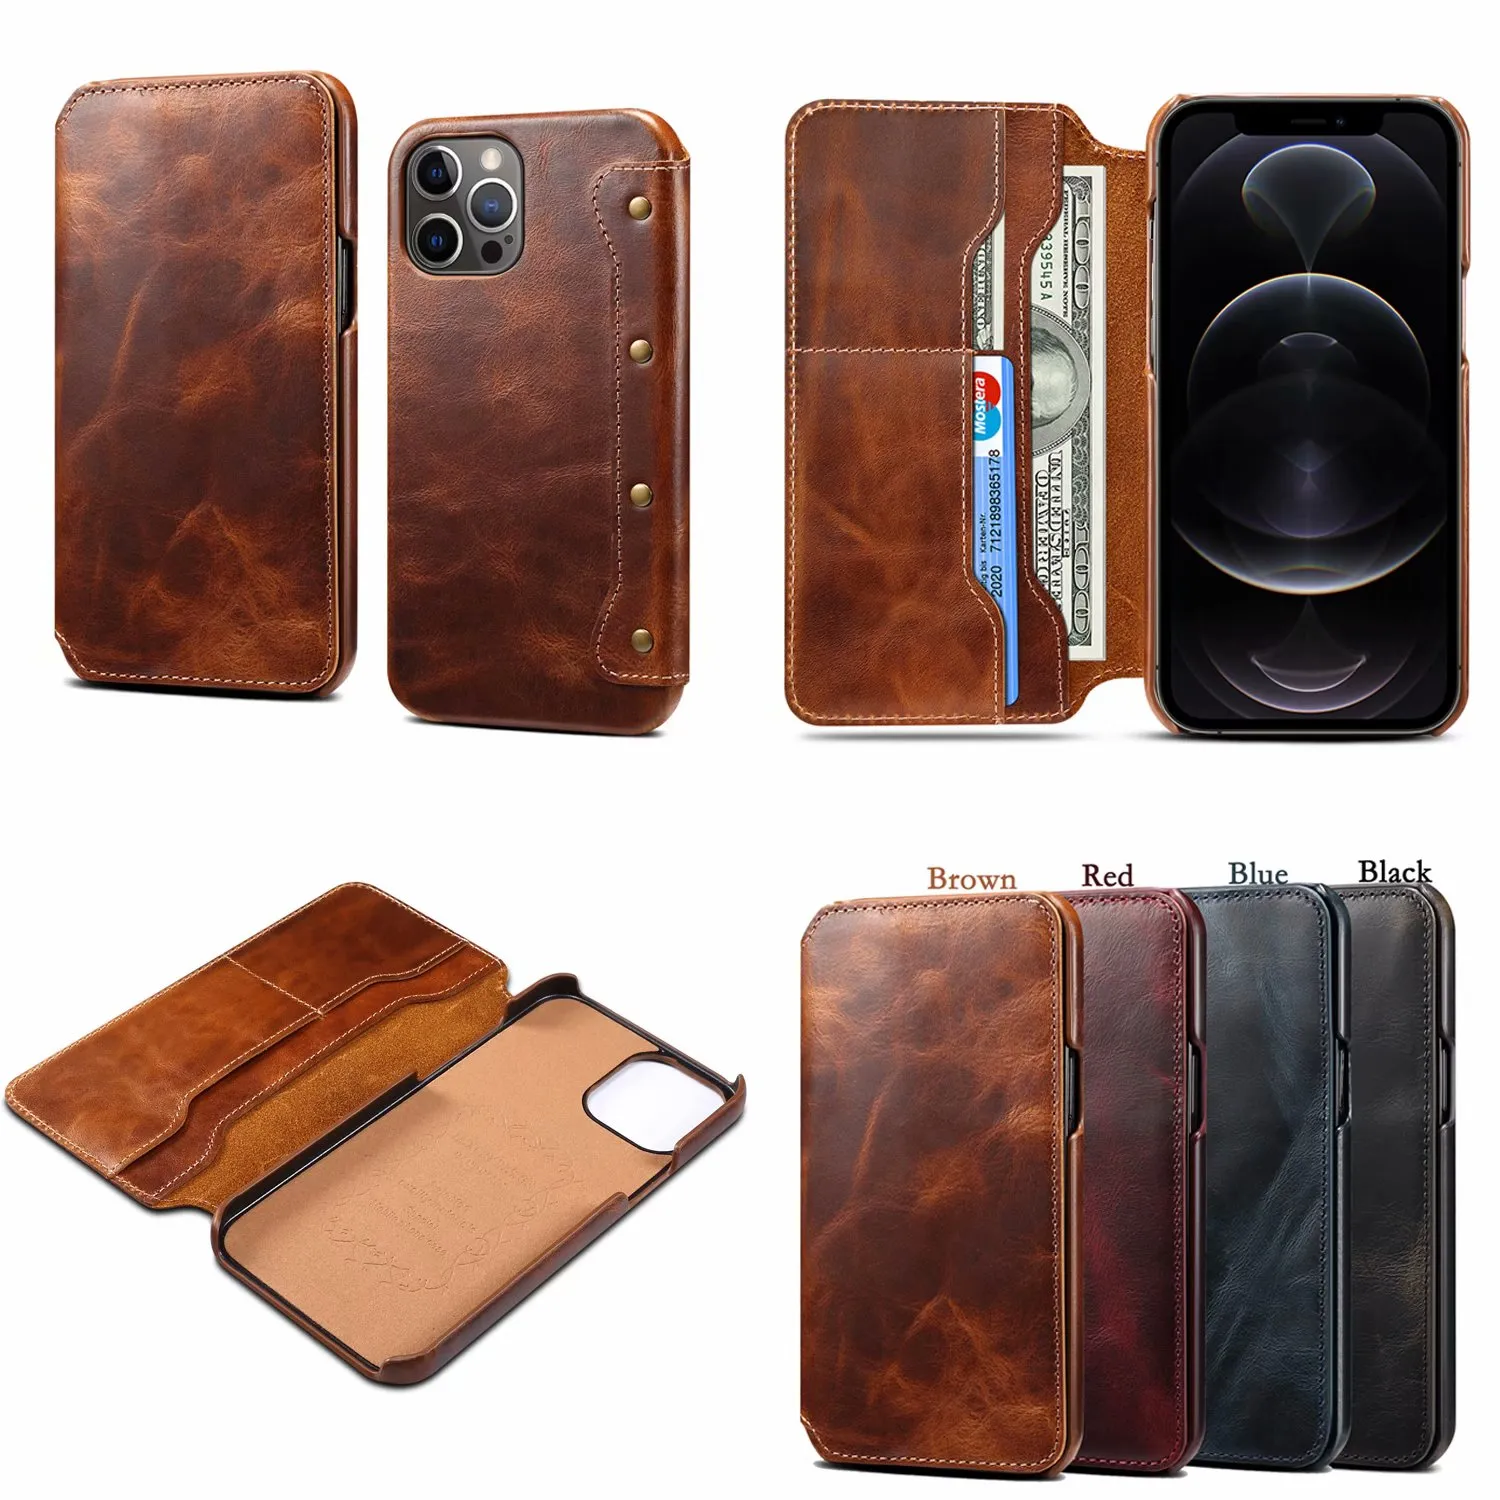 Business Retro Flip Leather Wallet Cell Phone Cases for Iphone 6 7 8plus X Xr 11 12 13 Pro Max Samsung S20 Note 20